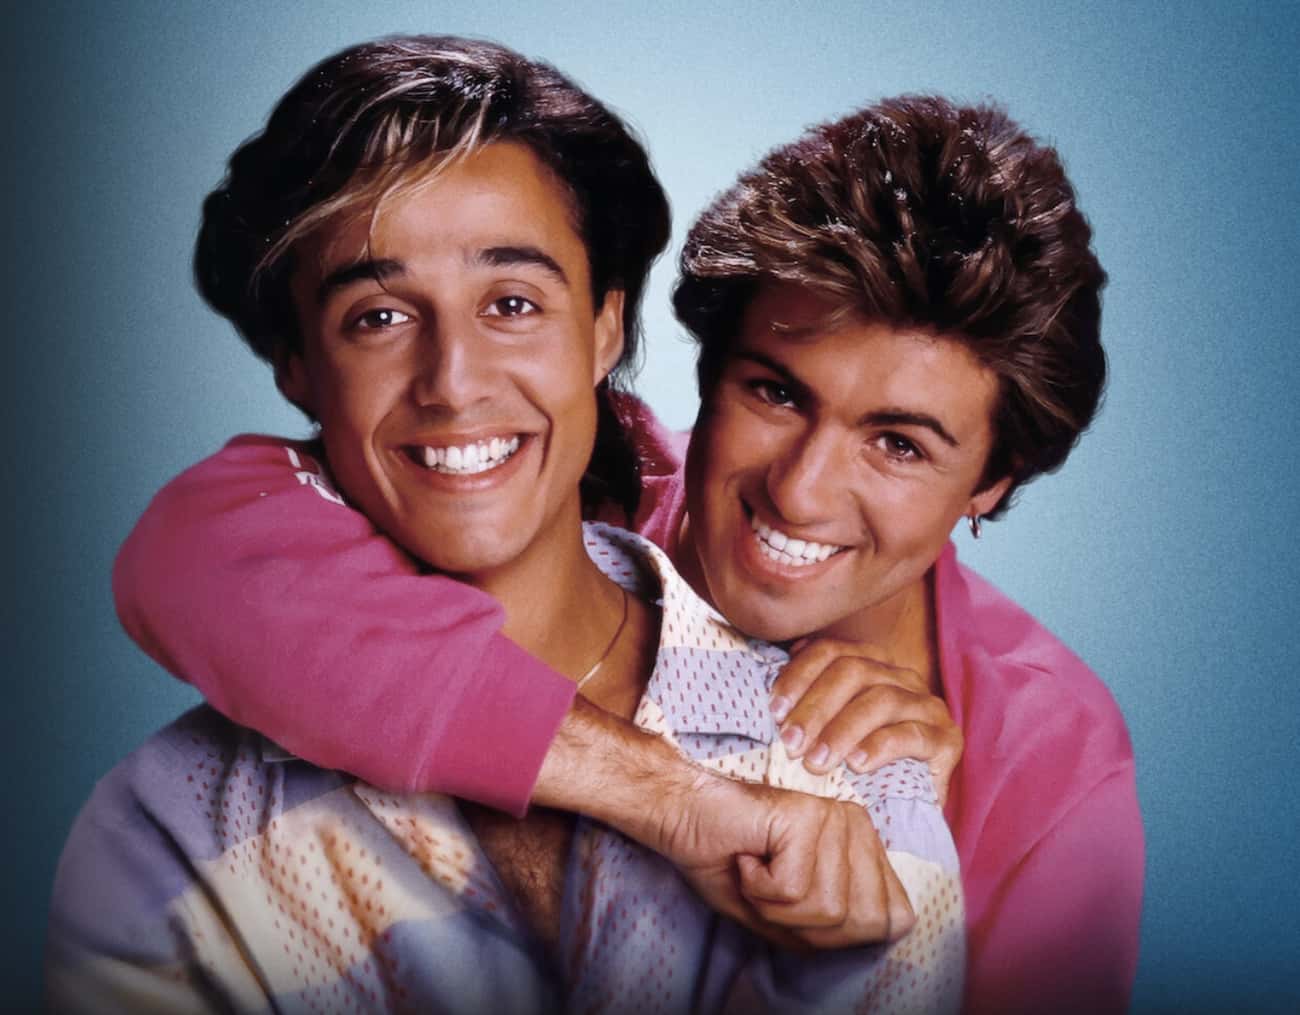 Andrew Ridgeley Of Wham! Was George Michael’s Inspiration And Support System 